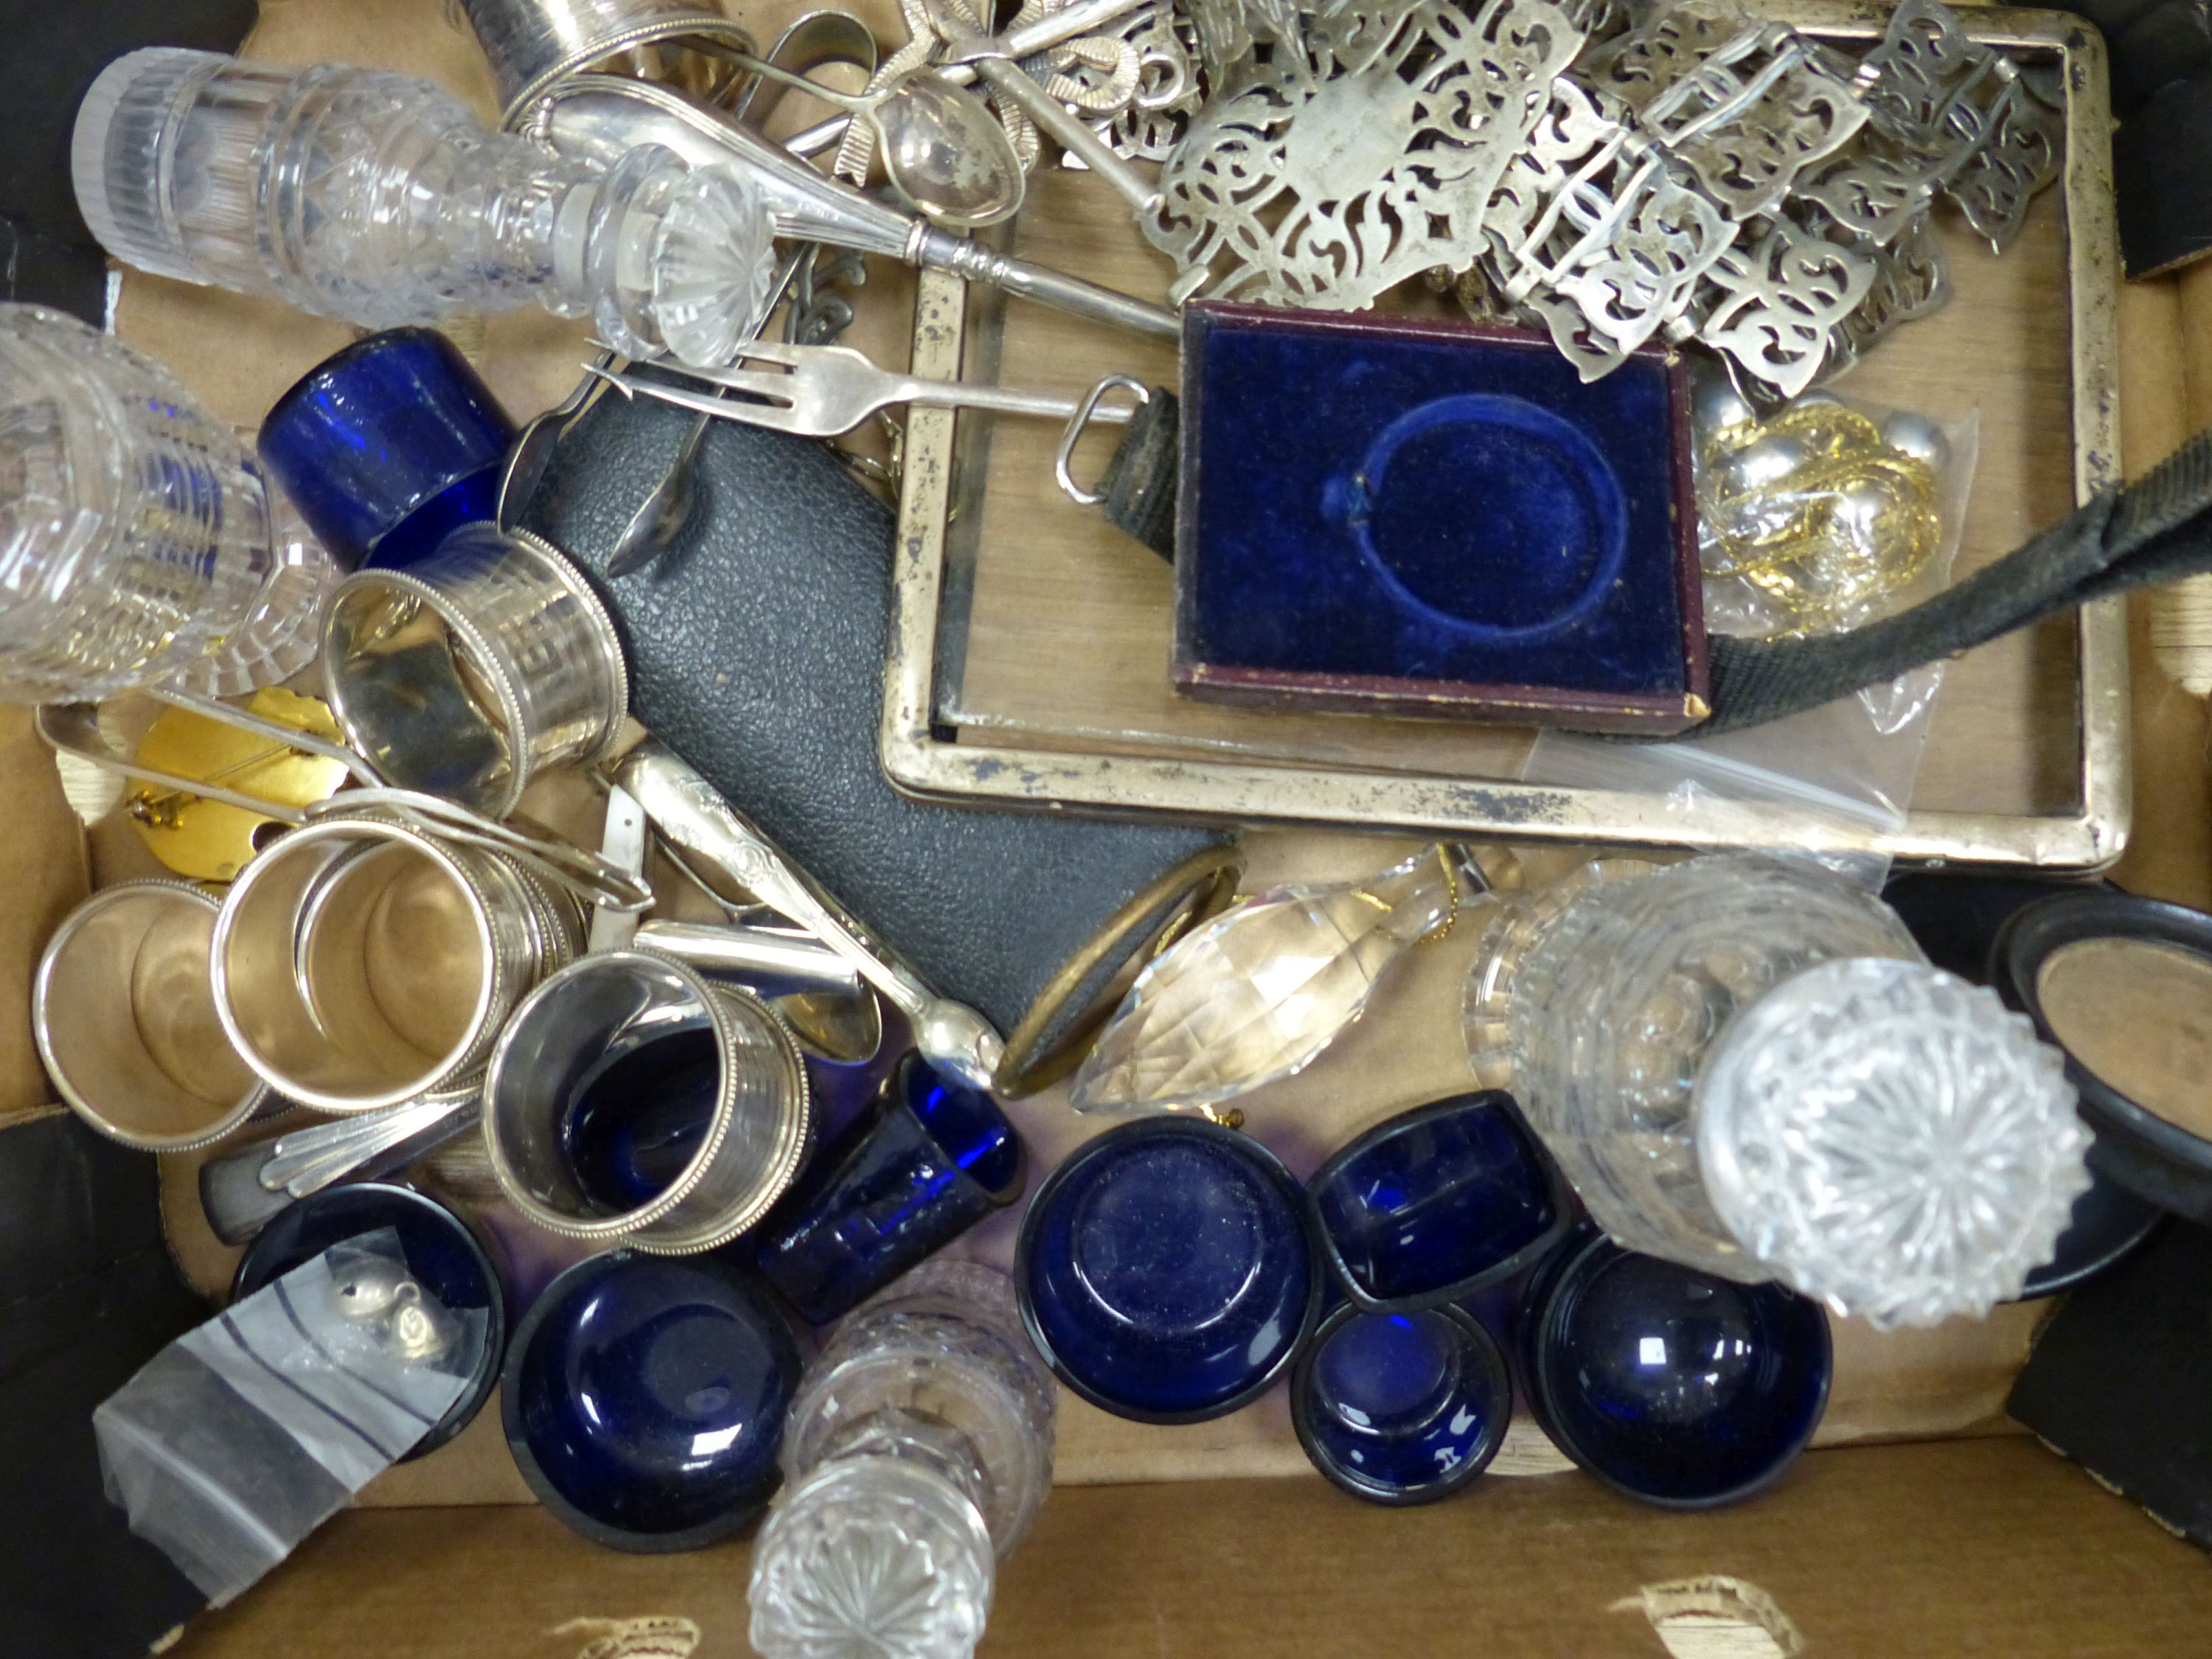 A quantity of miscellaneous plated ware, minor costume jewellery, blue glass condiment liners, glass cruet bottles etc.